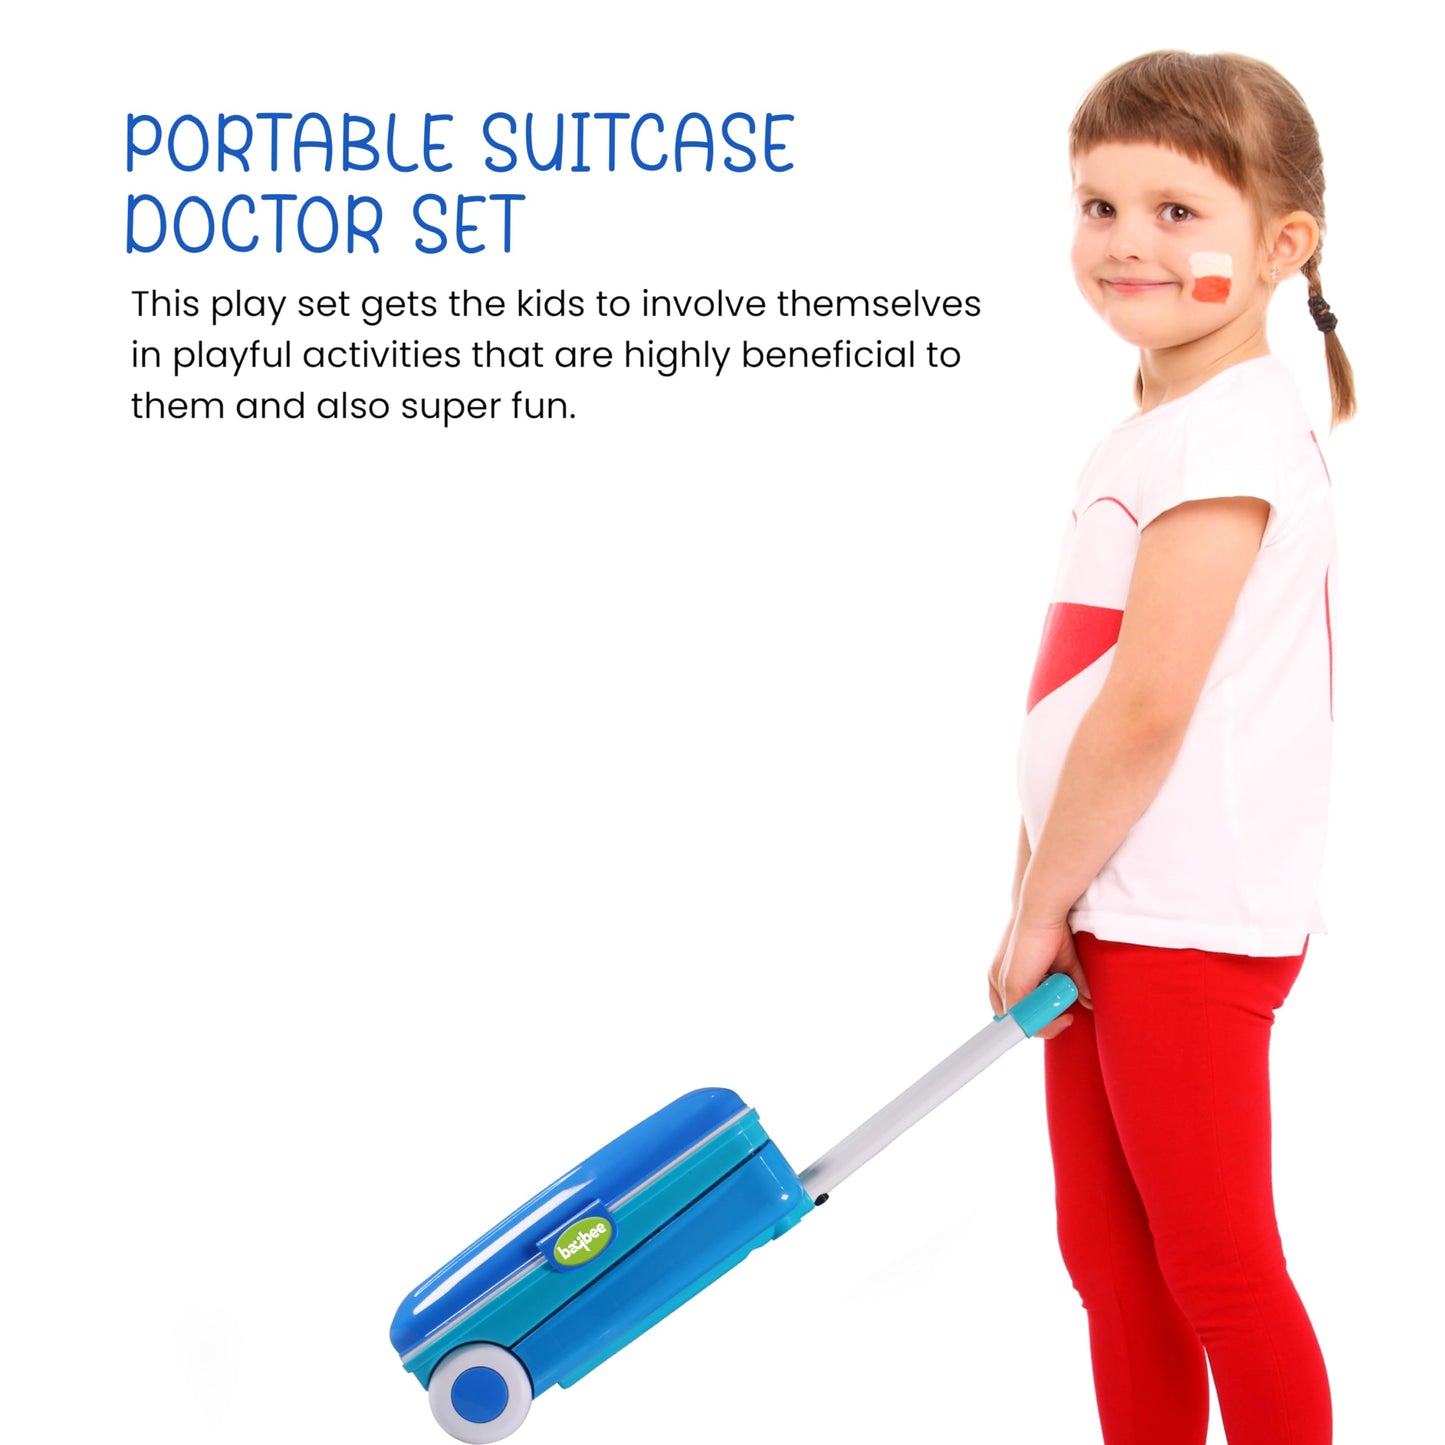 Doc-in-a-Box 3 in 1 Portable Pretend Play Doctor Set